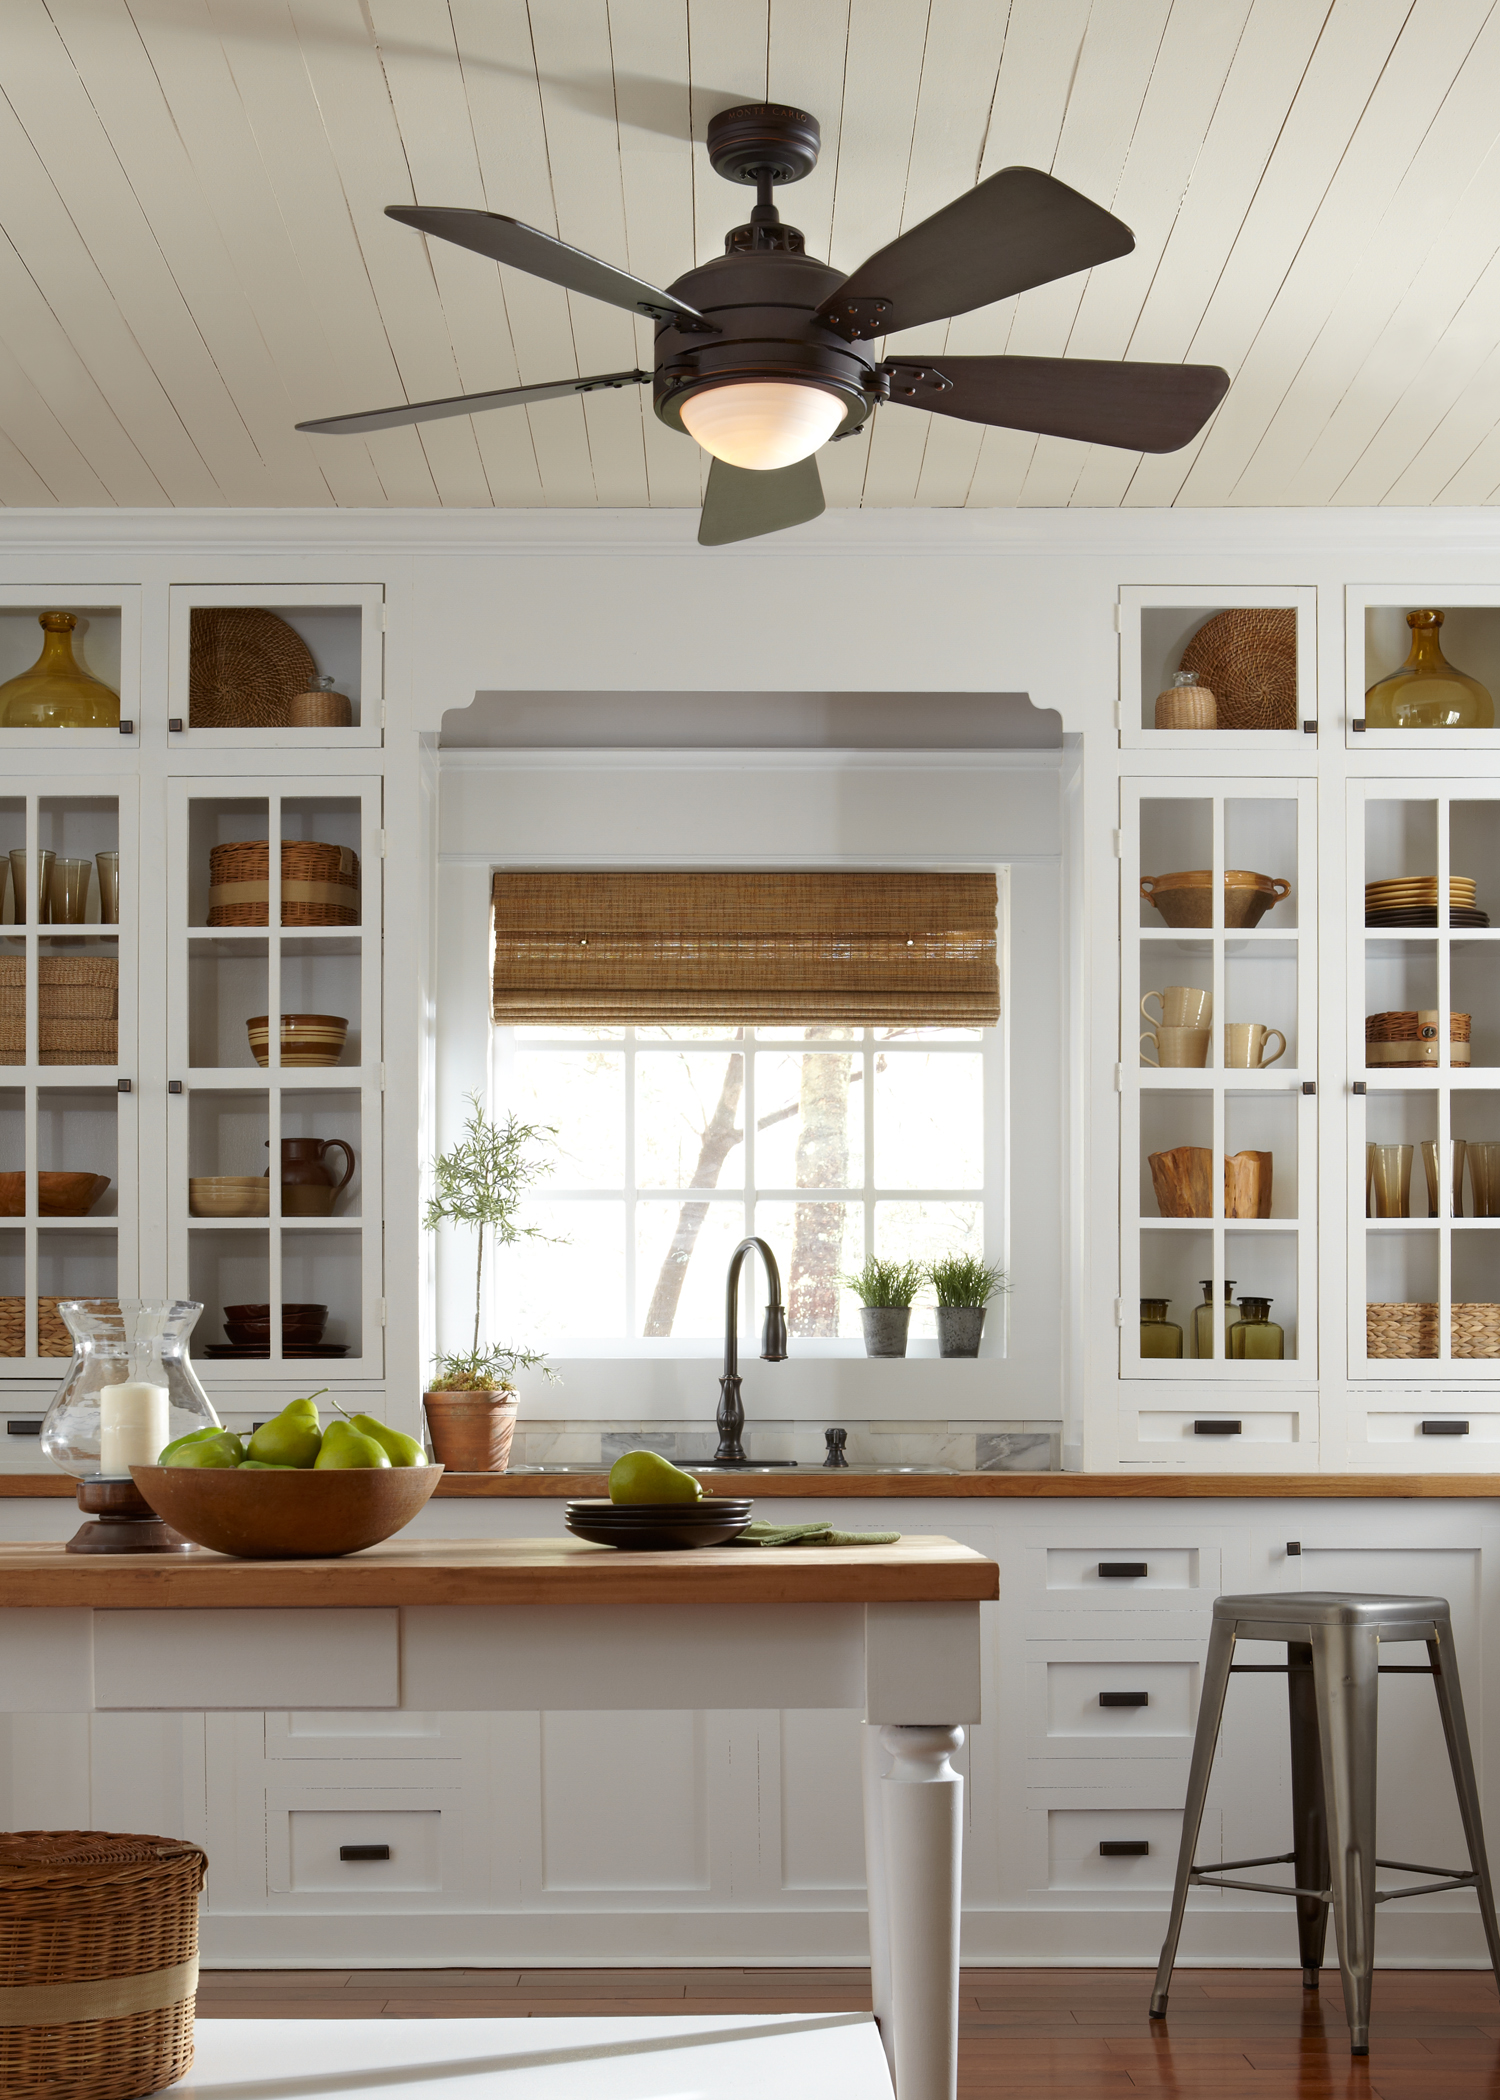 10 Tips To Help You Get the Right Ceiling fan for kitchen | Warisan